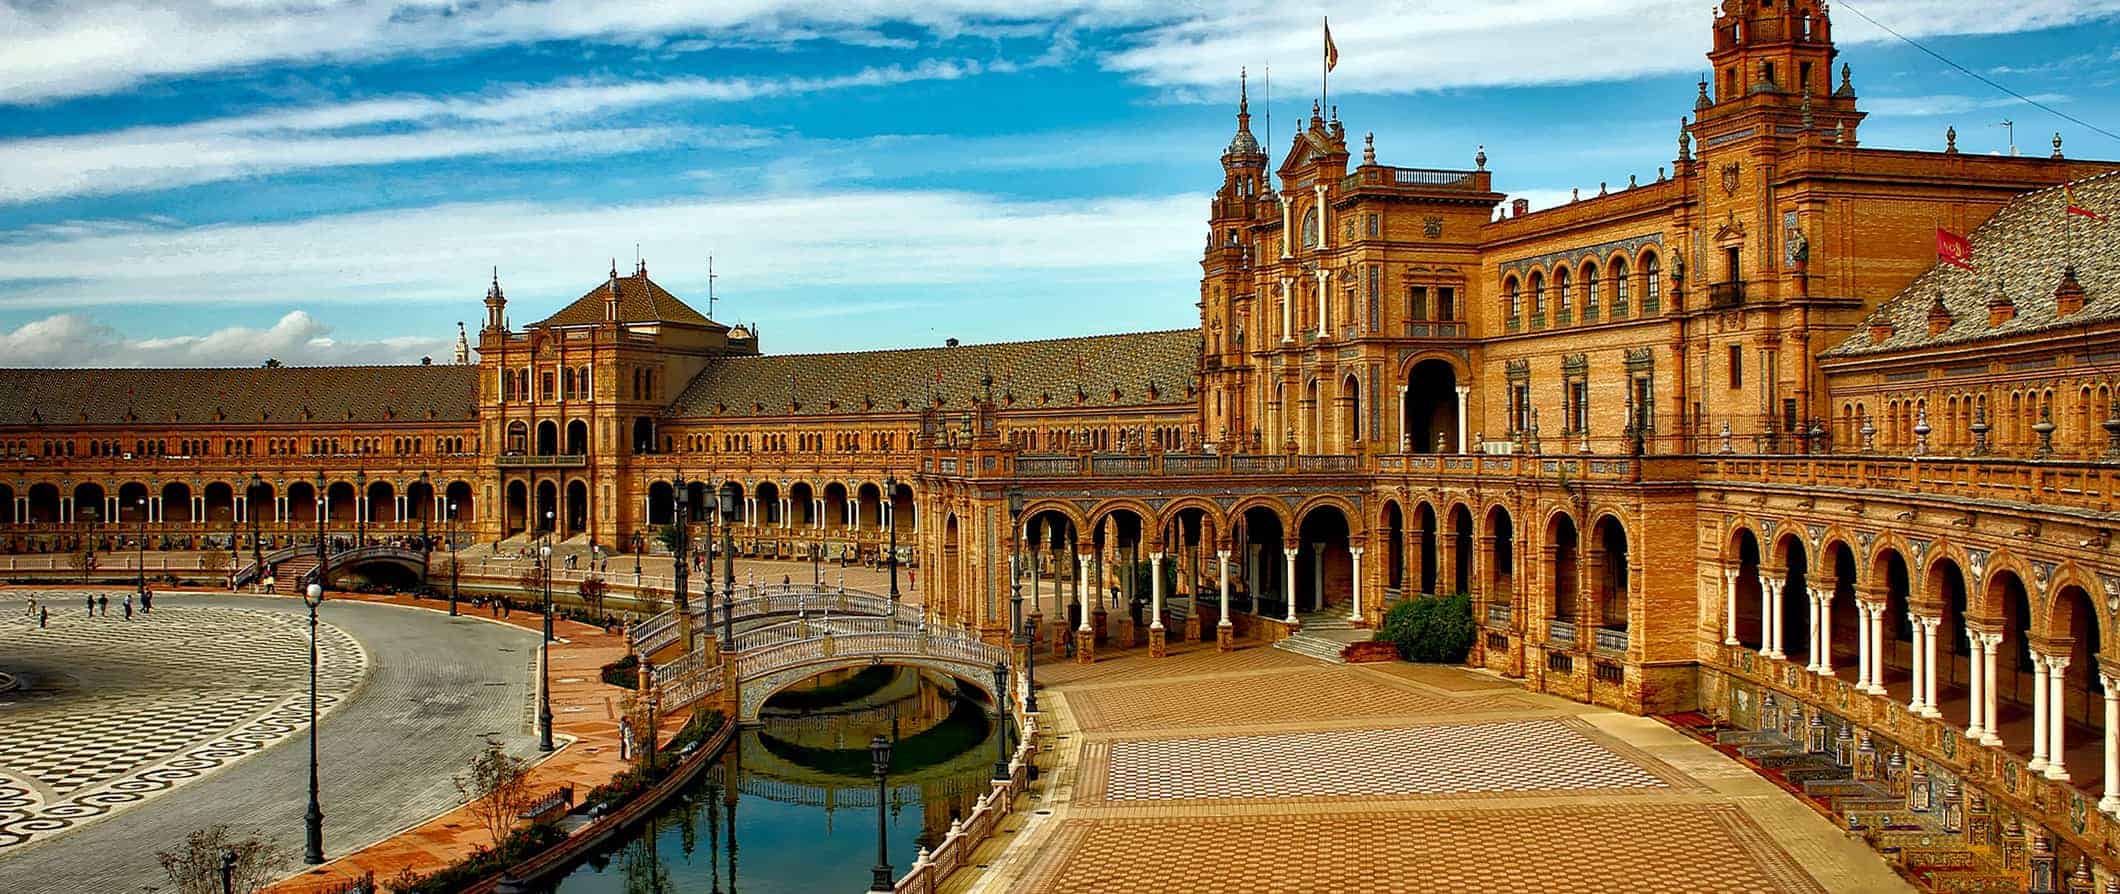 Seville Travel Guide: See, Do, Spend, & Save (Updated 2022)